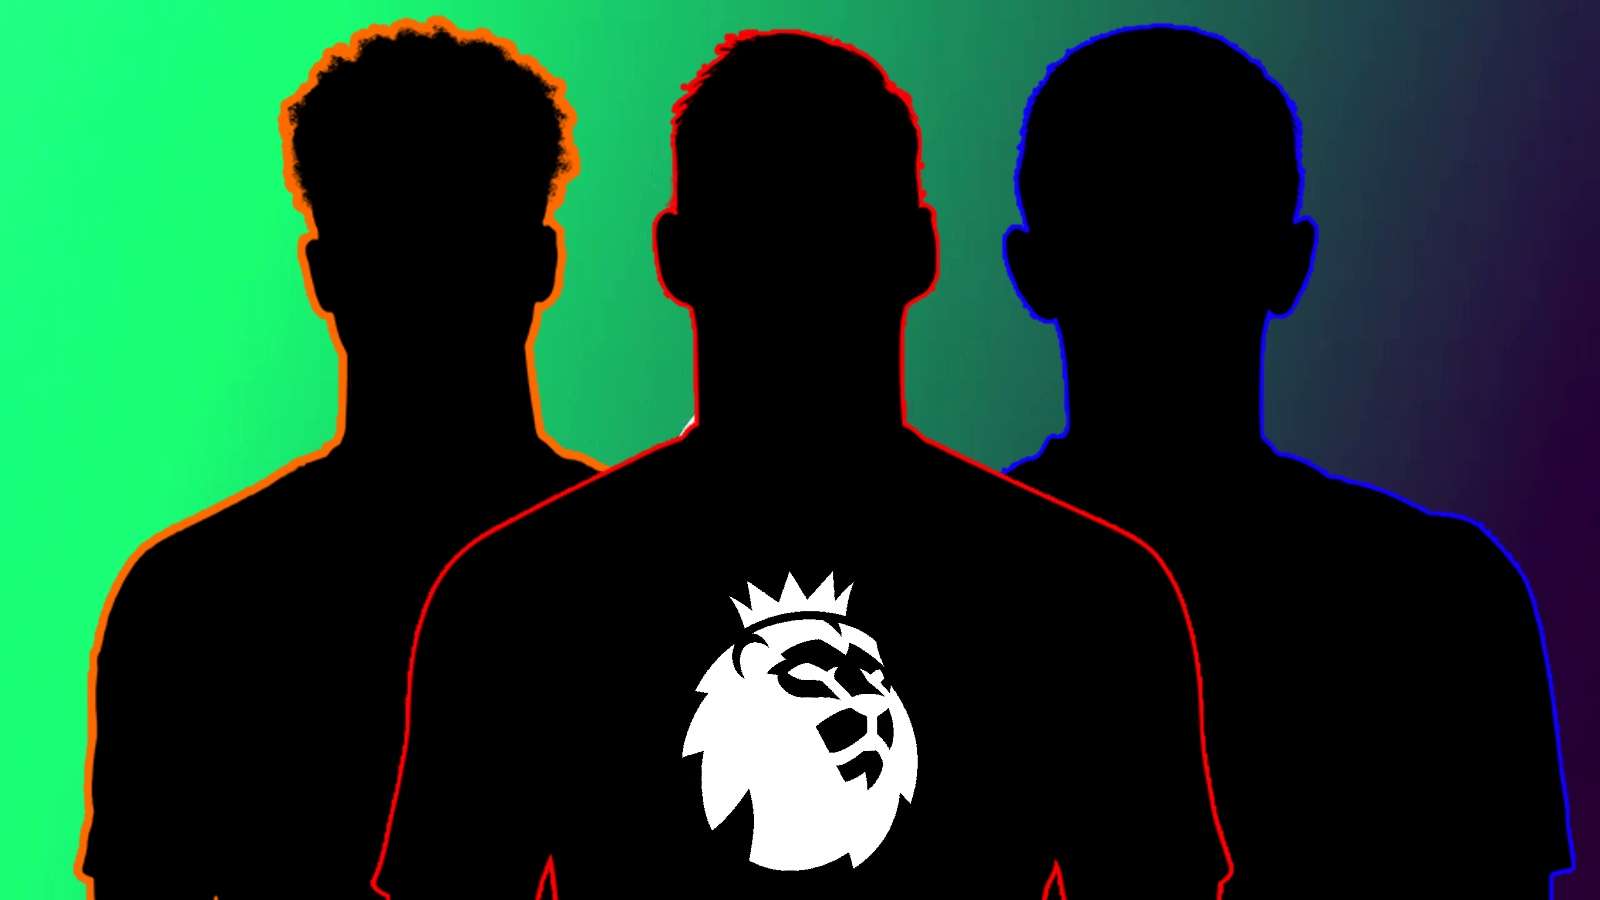 fpl player silhouettes on green and blue background